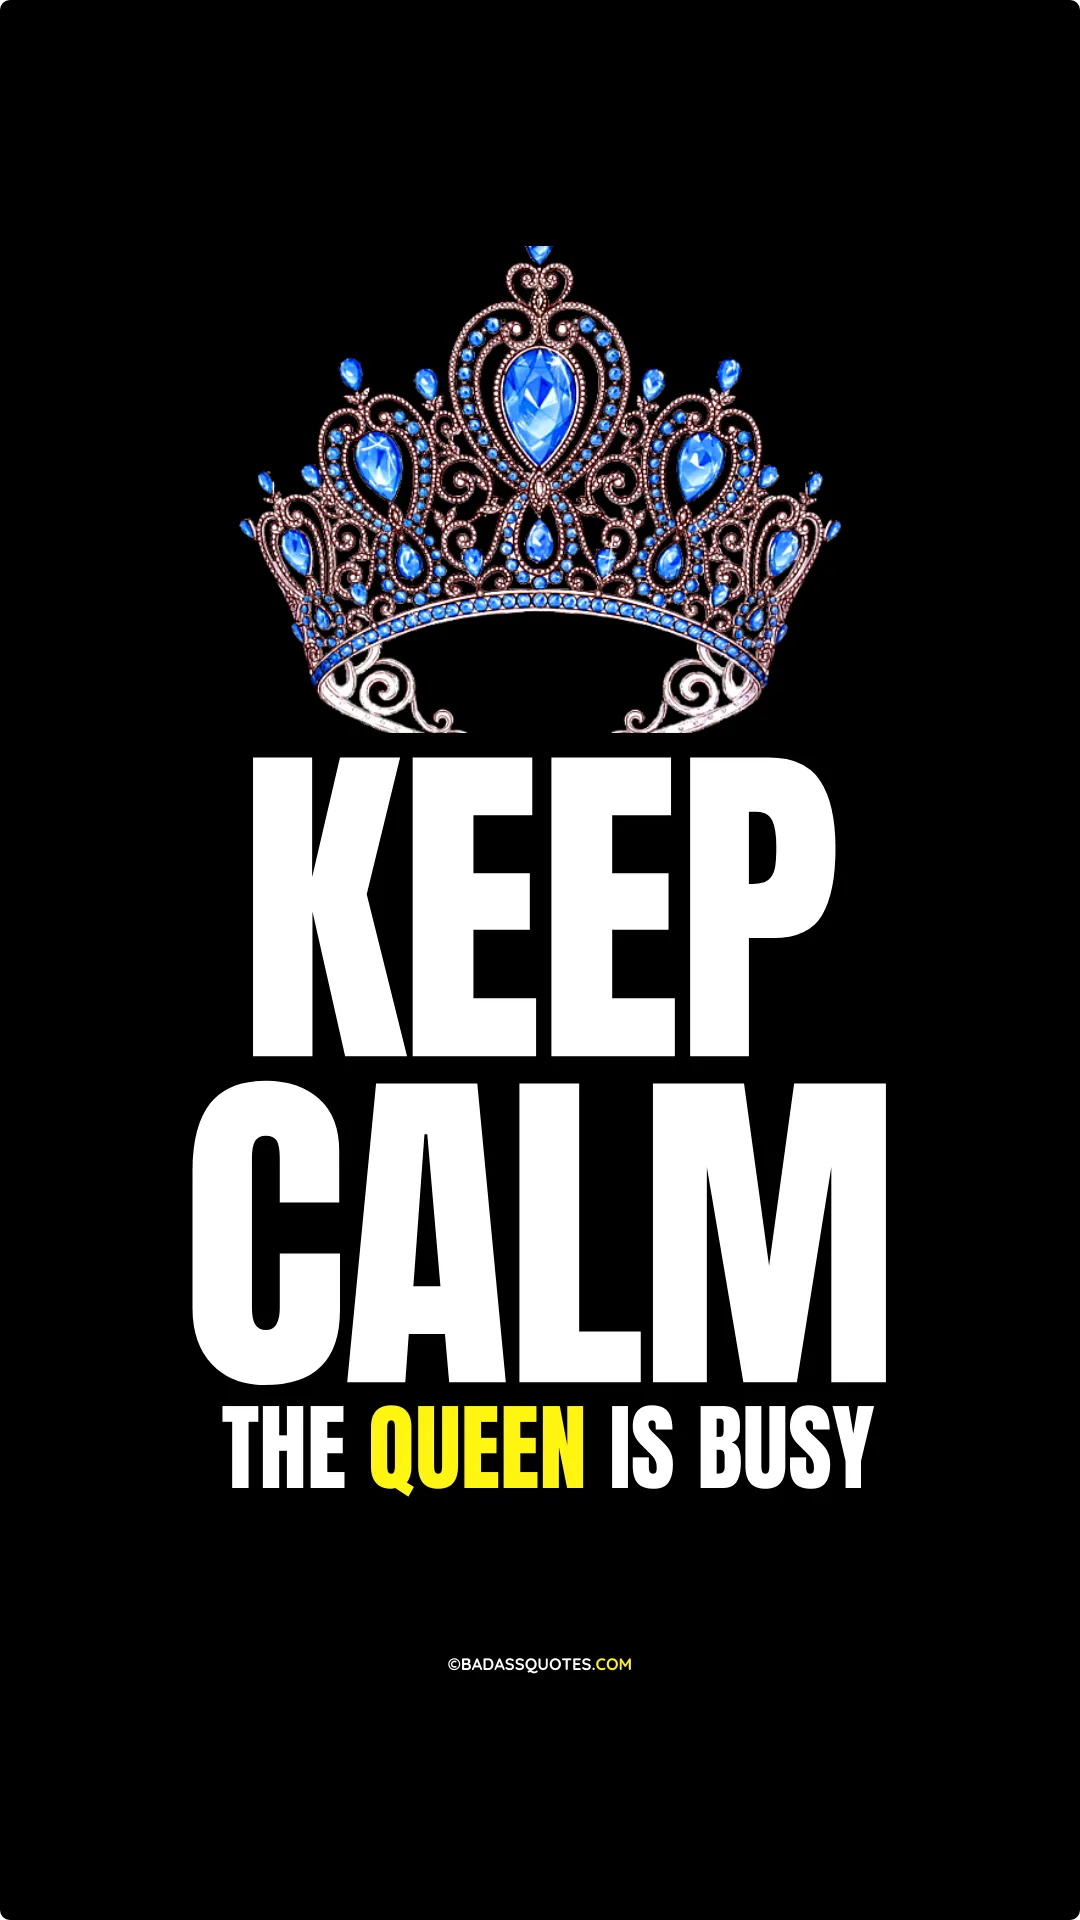 Keep Calm Wallpaper for IPhone & Android [With Quotes]